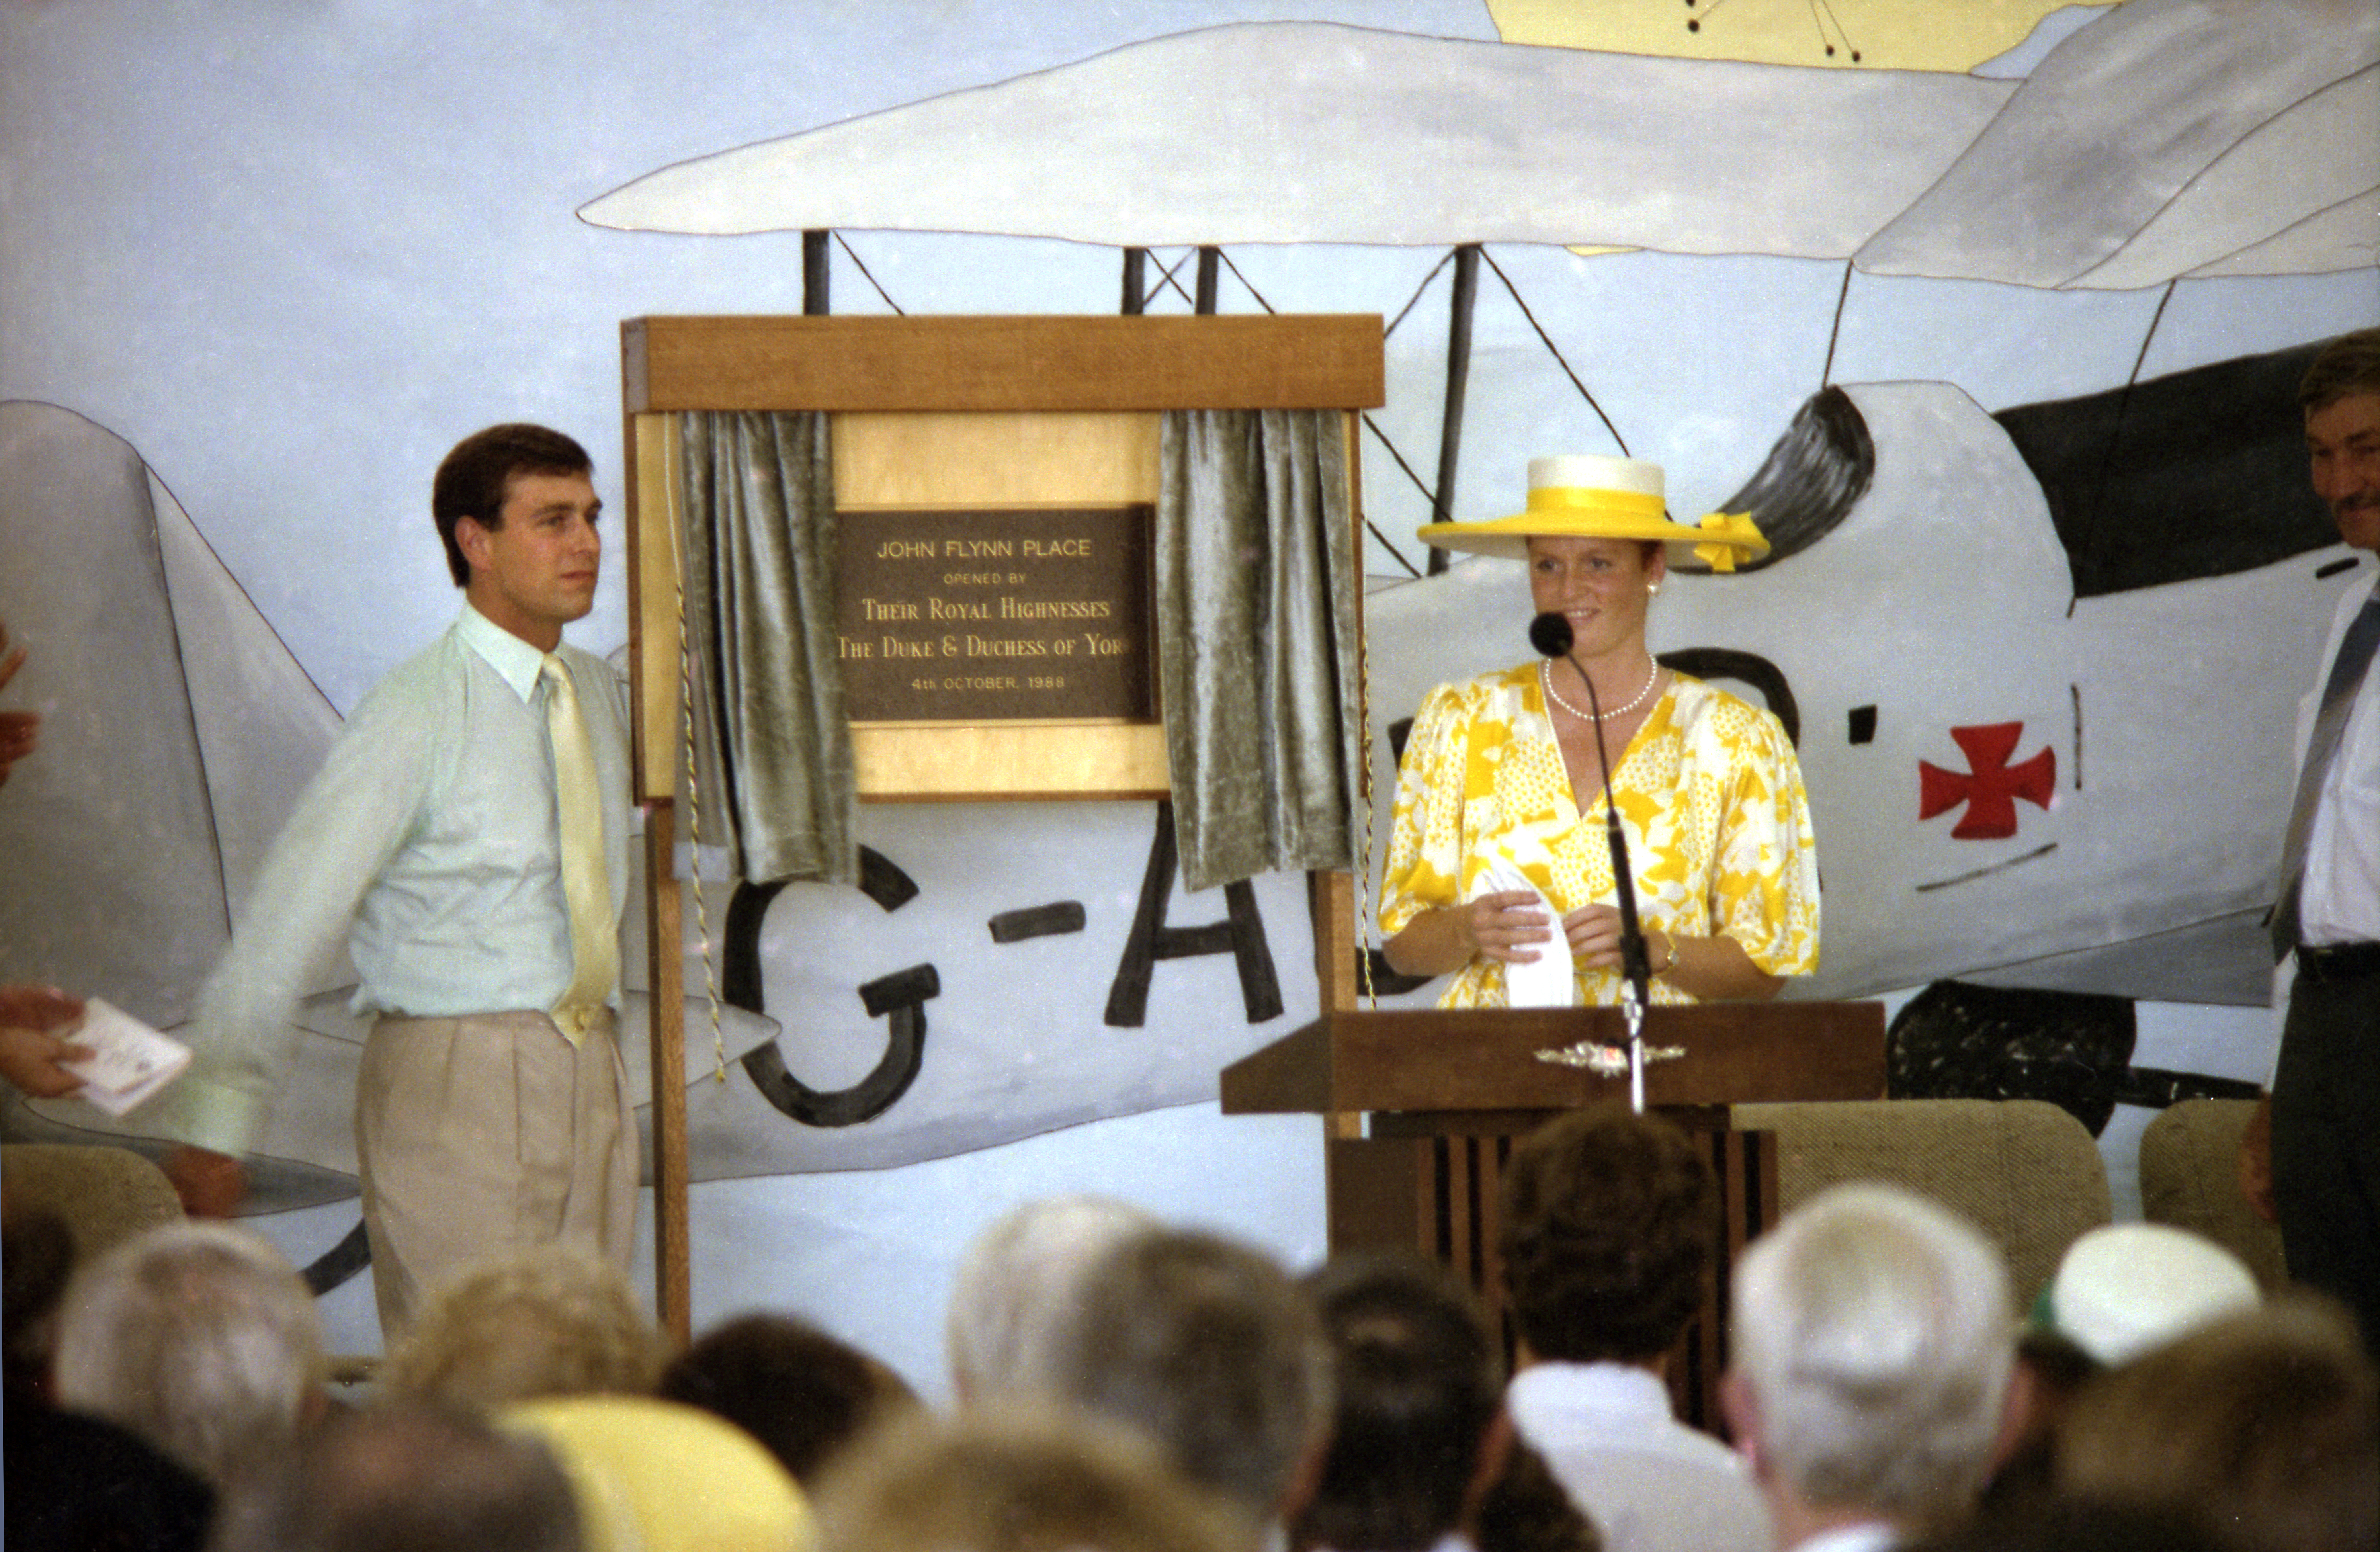 HRH Prince Andrew, The Duke of York, and HRH The Duchess of York officially opening John Flynn Place, Cloncurry, 4 October 1988